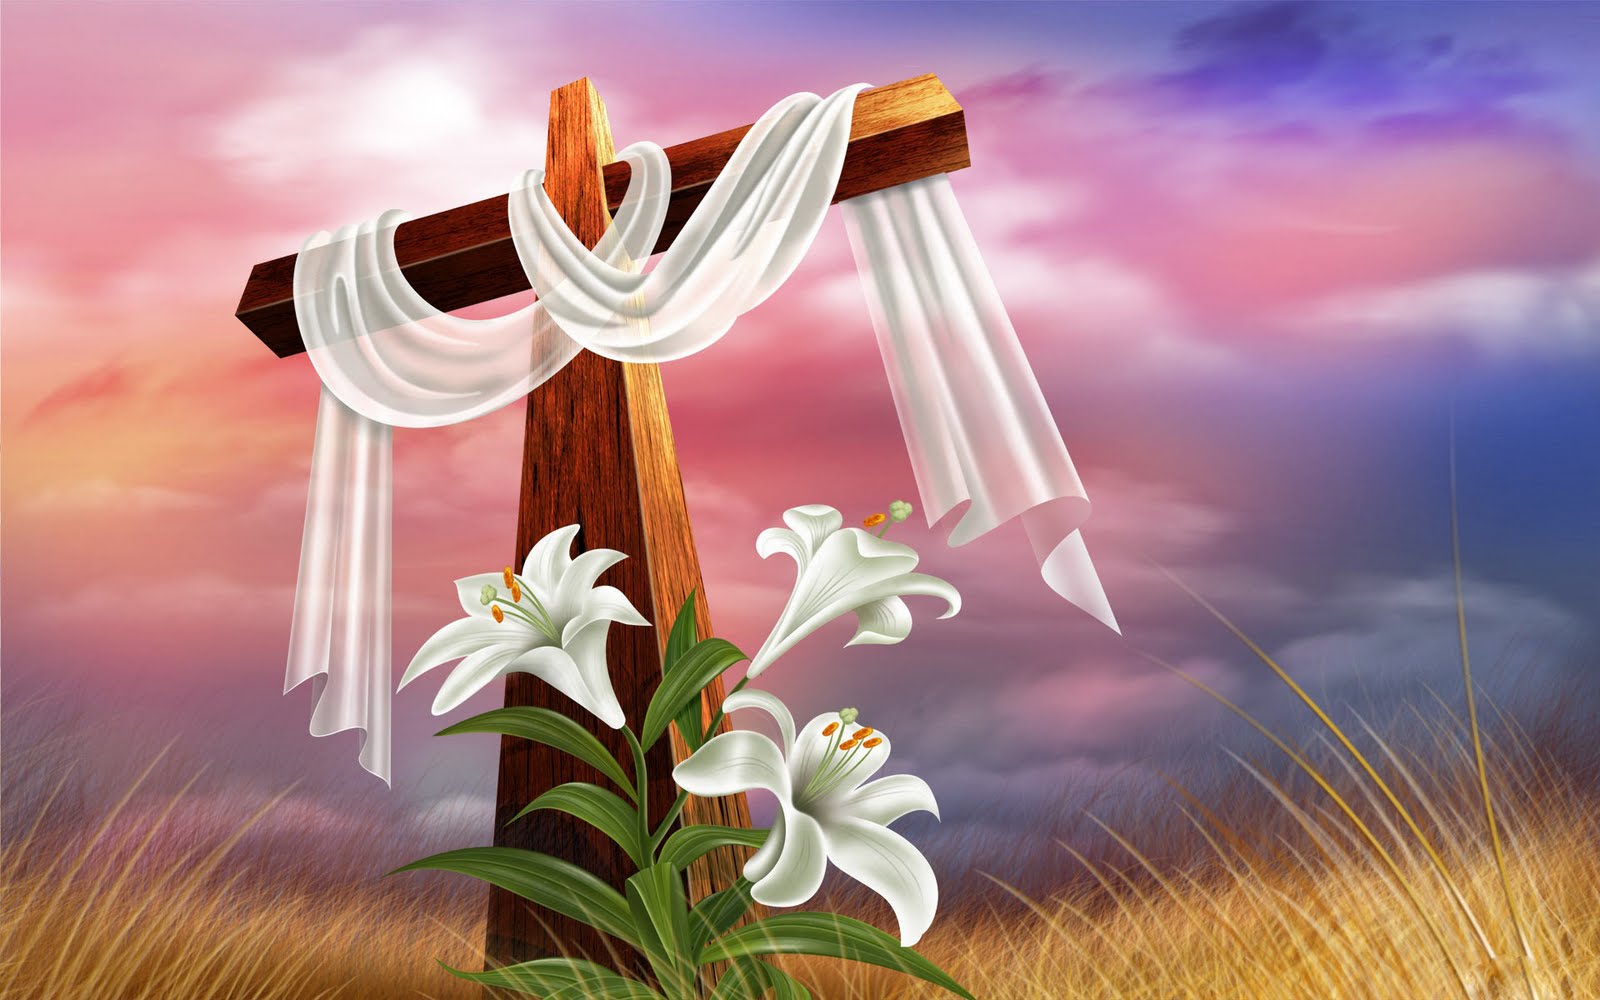 Religious Easter Background Images Browse 147252 Stock Photos  Vectors  Free Download with Trial  Shutterstock